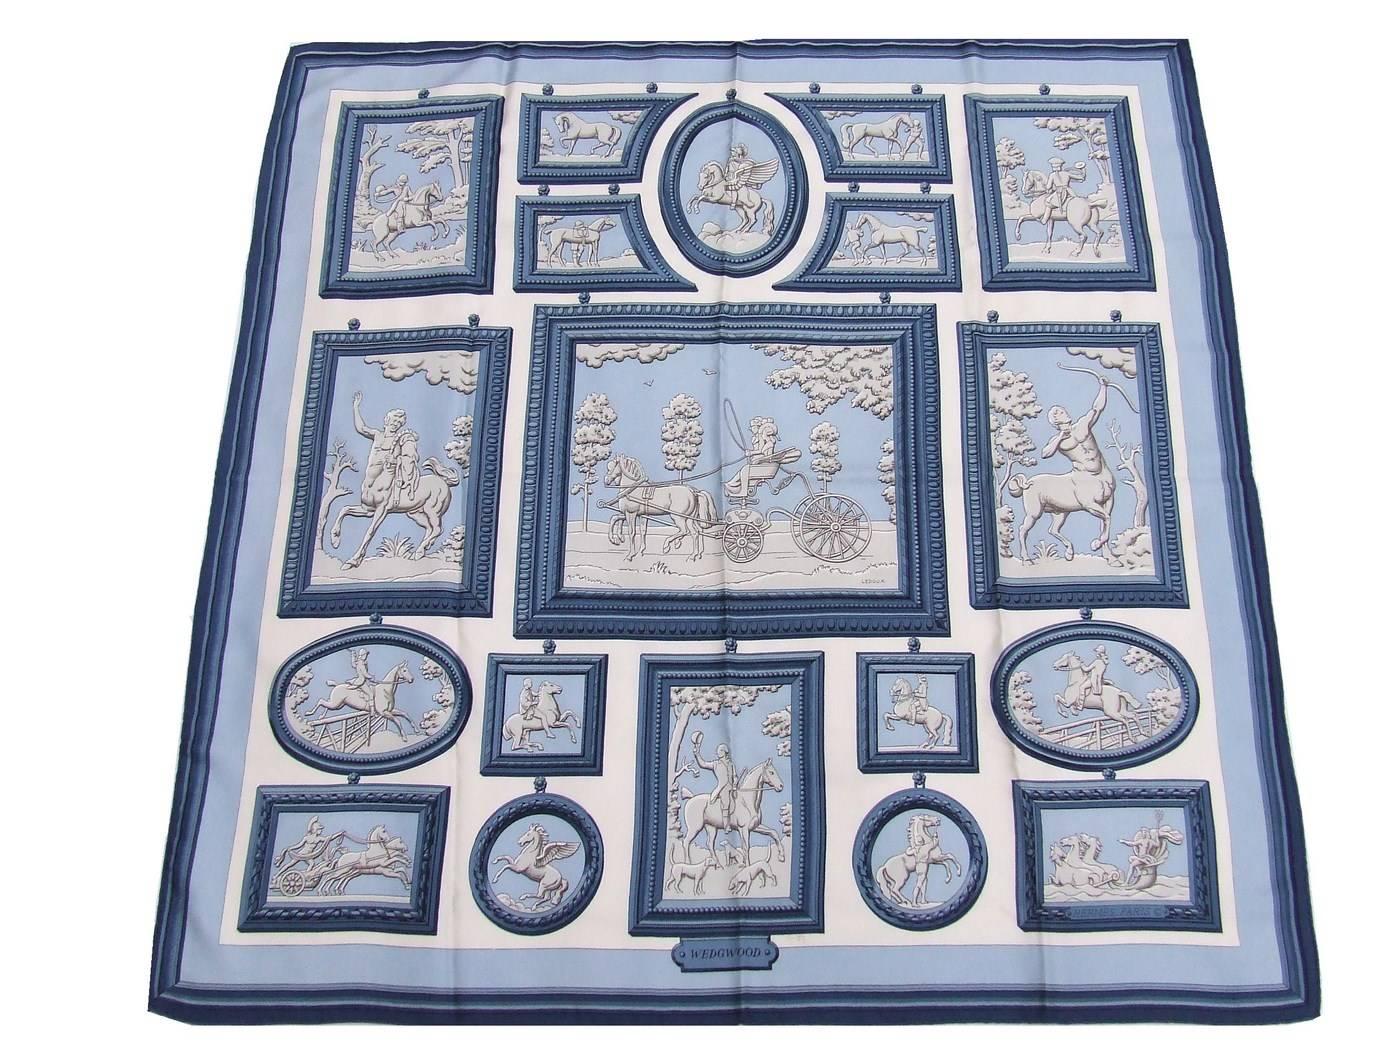 AMAZING AUTHENTIC HERMES SCARF

Called: 